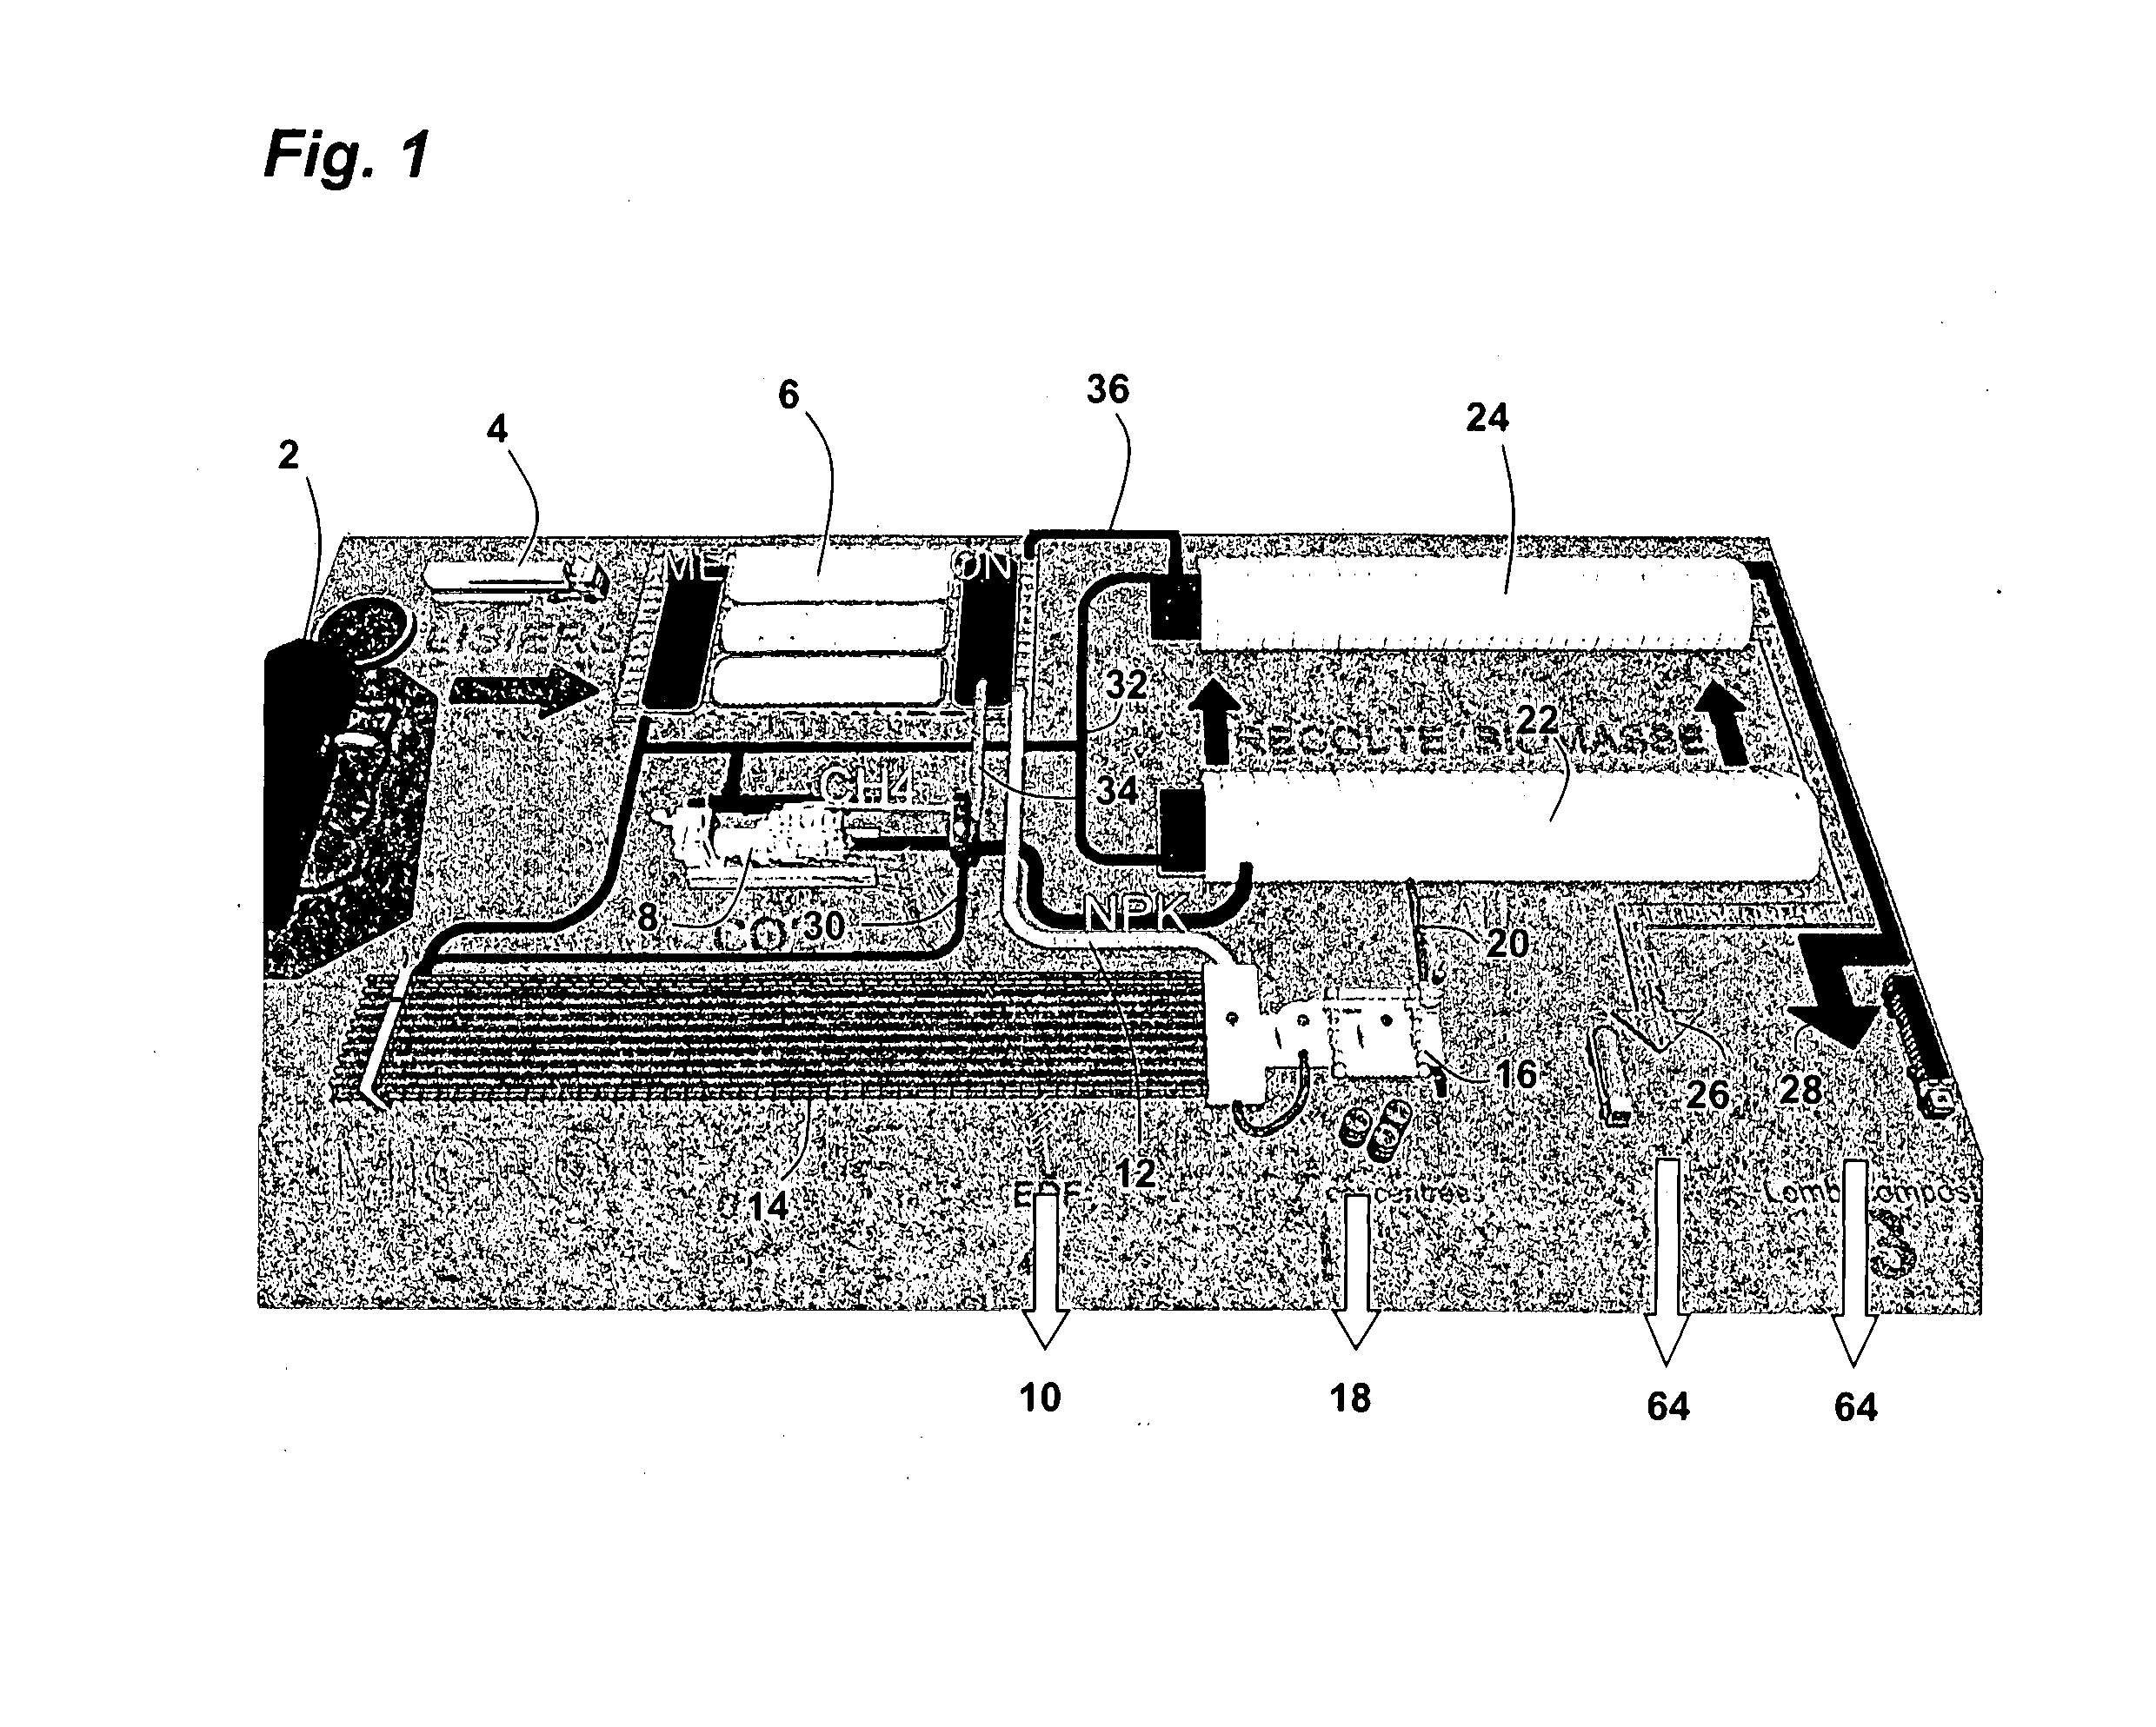 Facility for treating and recycling animal waste comprising methanisation, cultivation of microalgae and macrophytes, and vermiculture